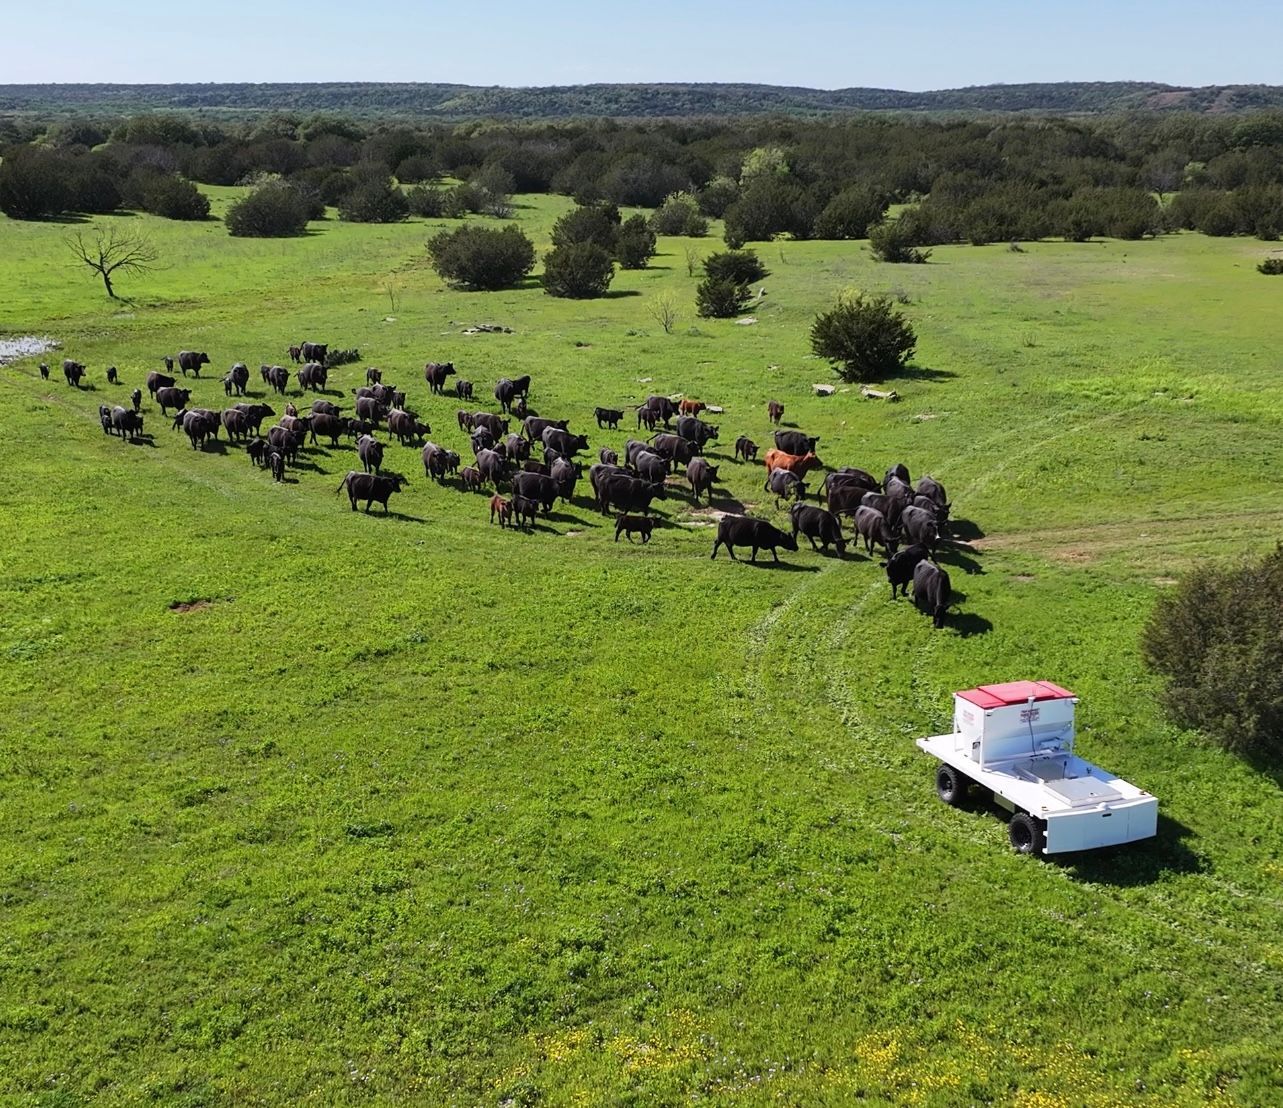 An aerial view of the ranch rover with a herd of cows in a grassy field.